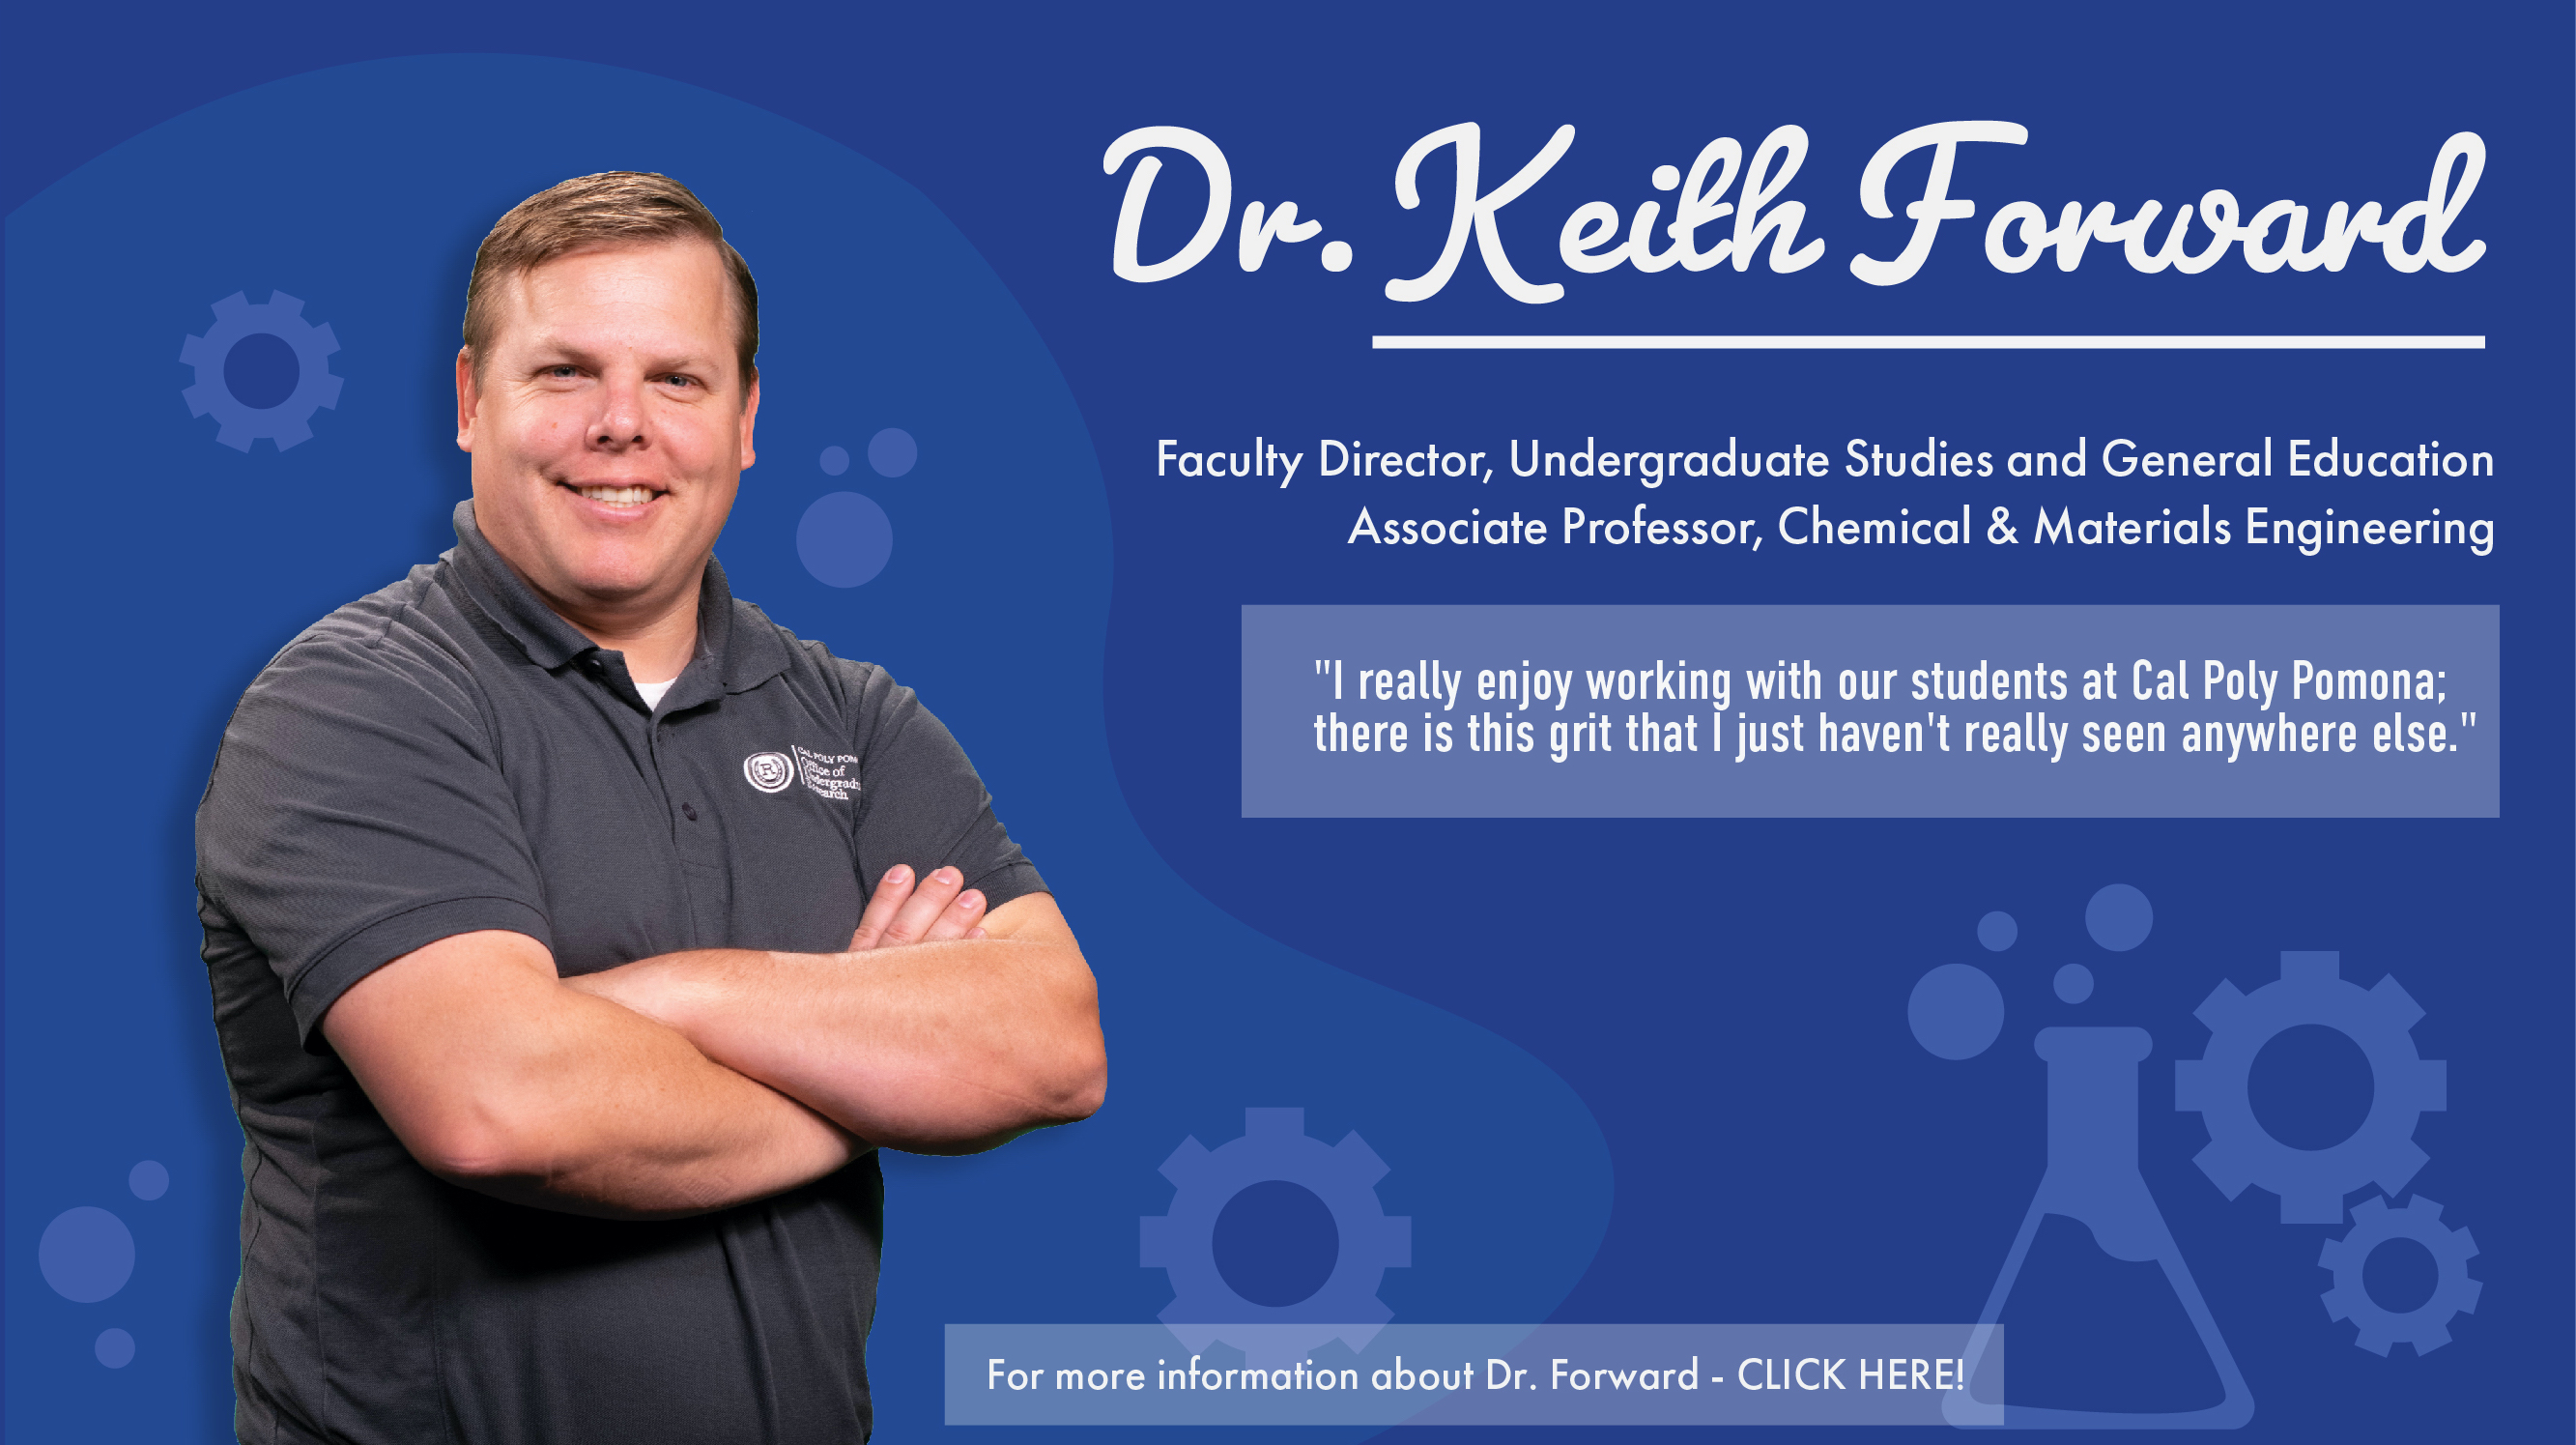 Cut out of a man standing with his arms crossed and smiling with a blue background and text with the following content: Faculty DIrector, Undergraduate Studies and General education. Next line says: Associate Professor, Chemical & Materials Engineering.